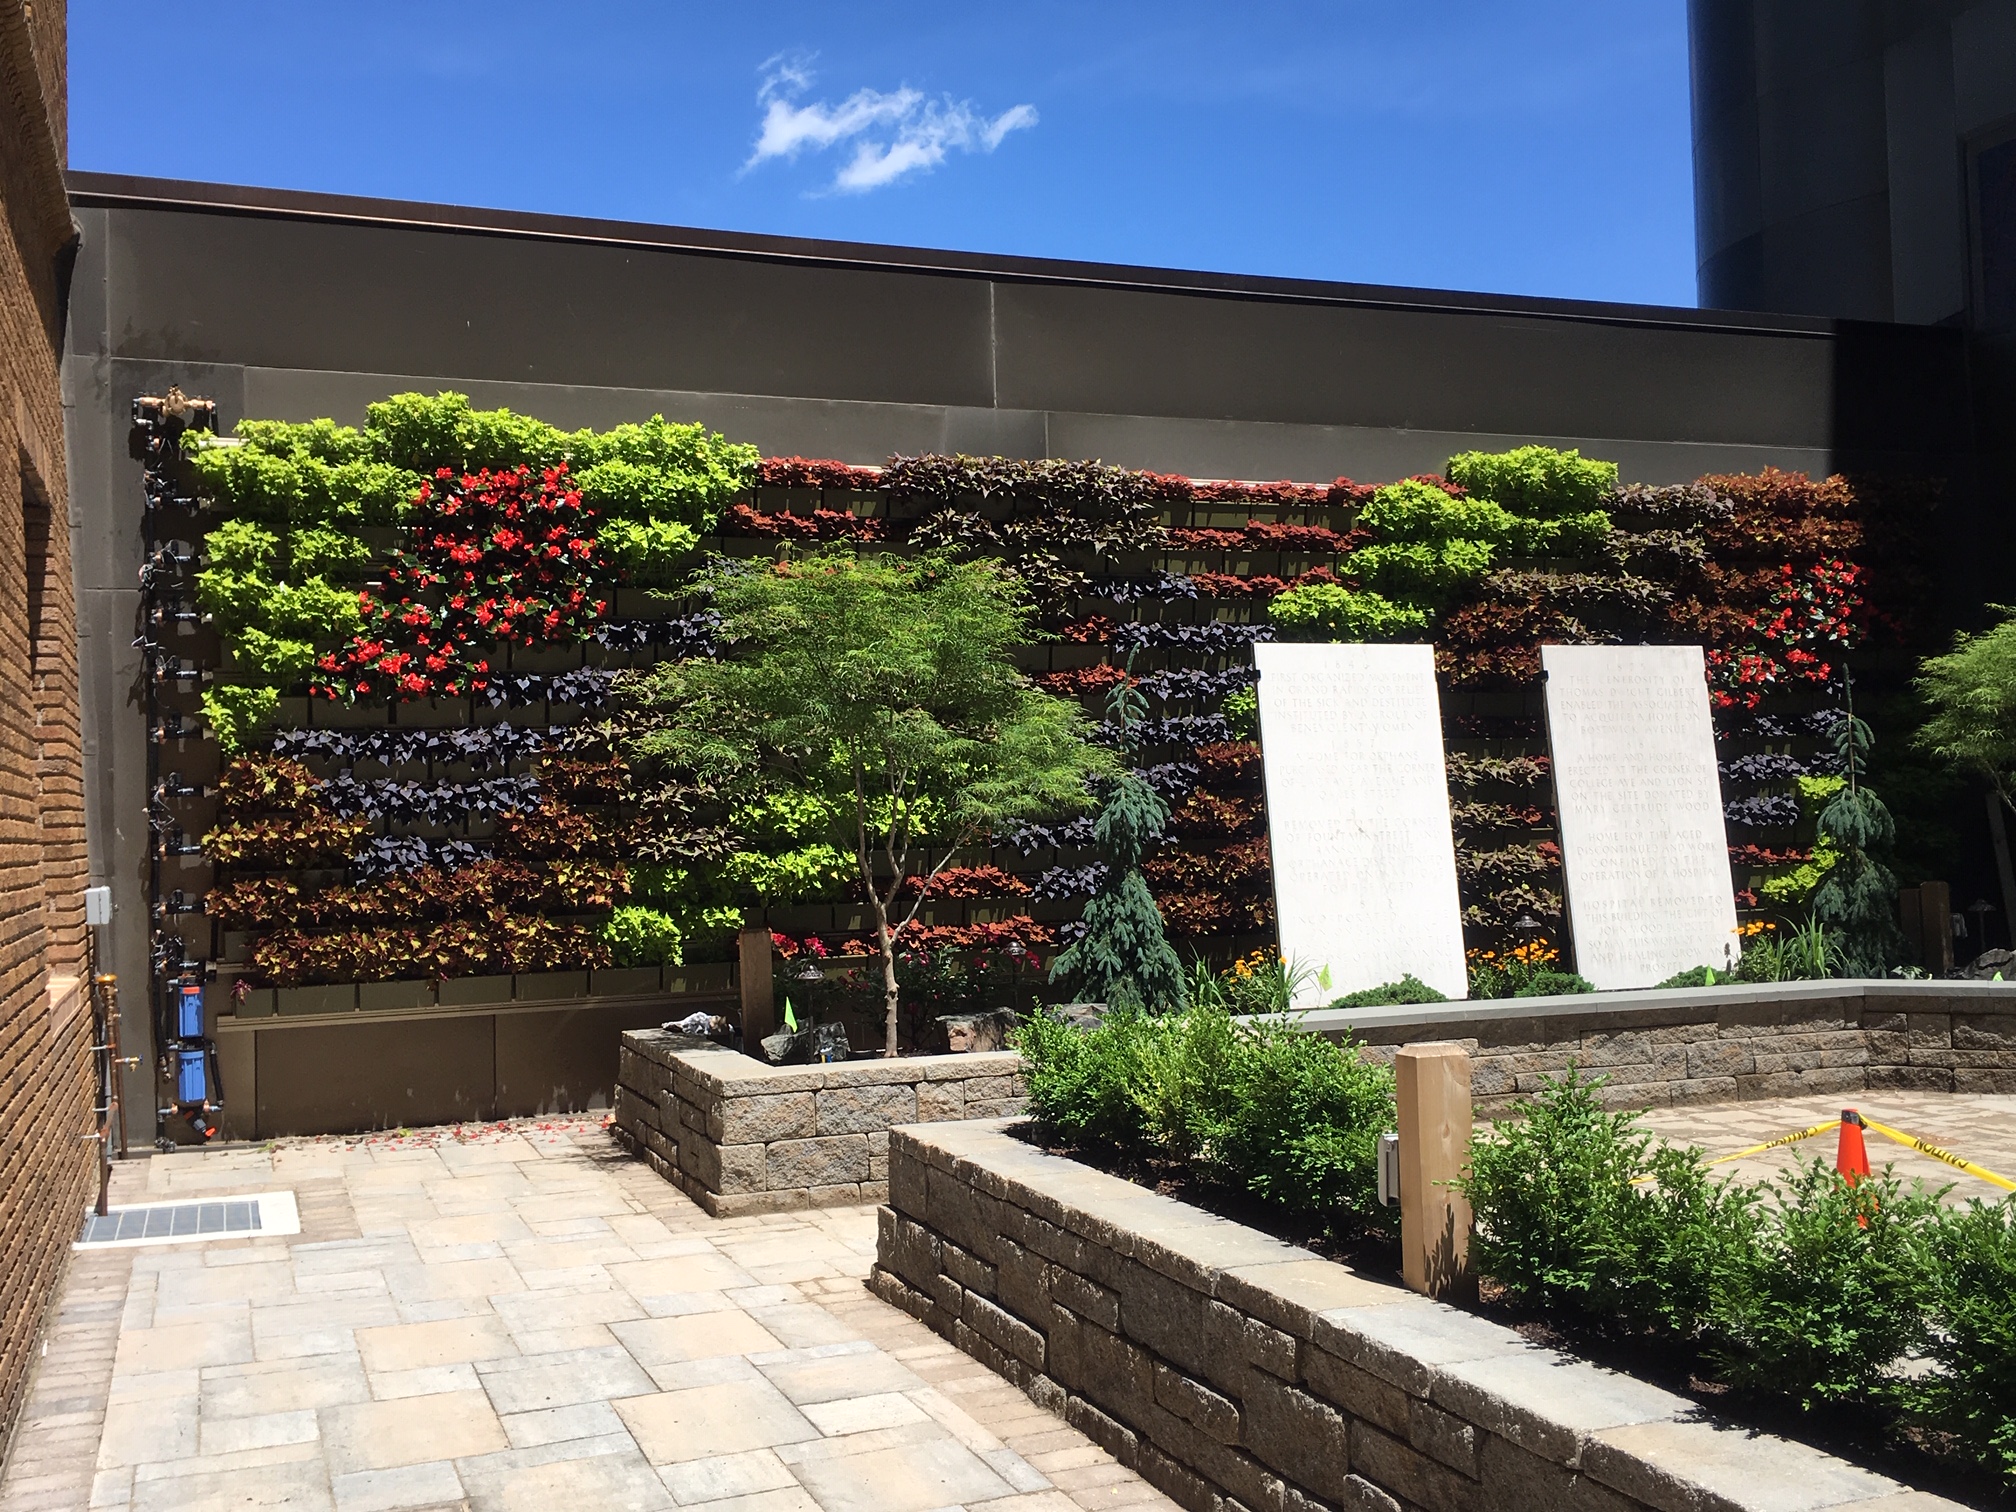 Living wall with colorful blend of annuals in a hospital courtyard